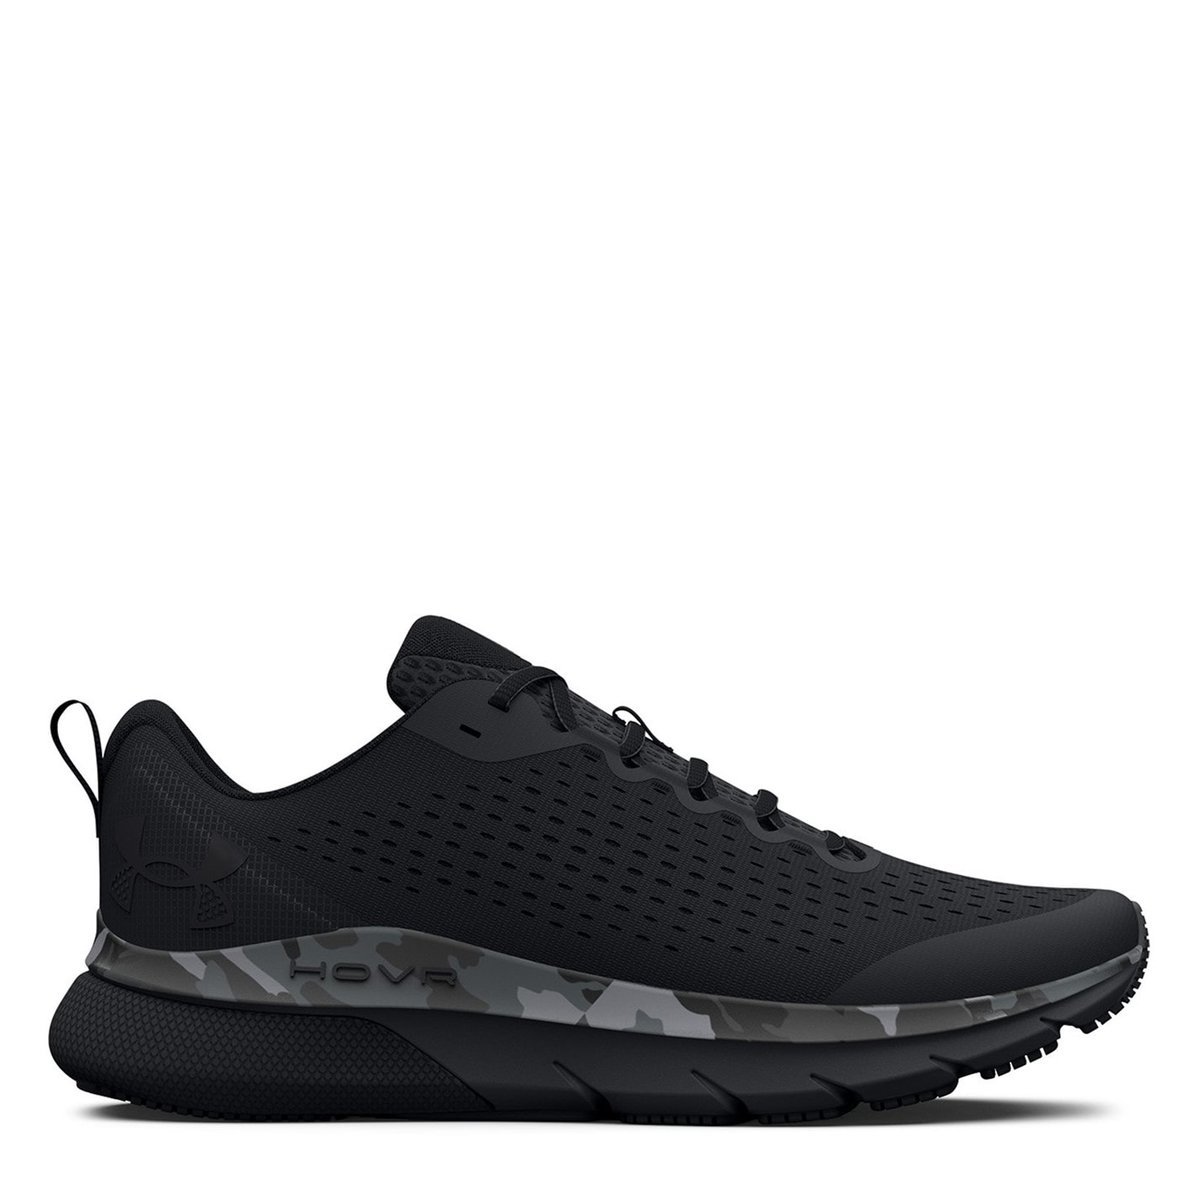 Under Armour Running Shoes - Lovell Sports